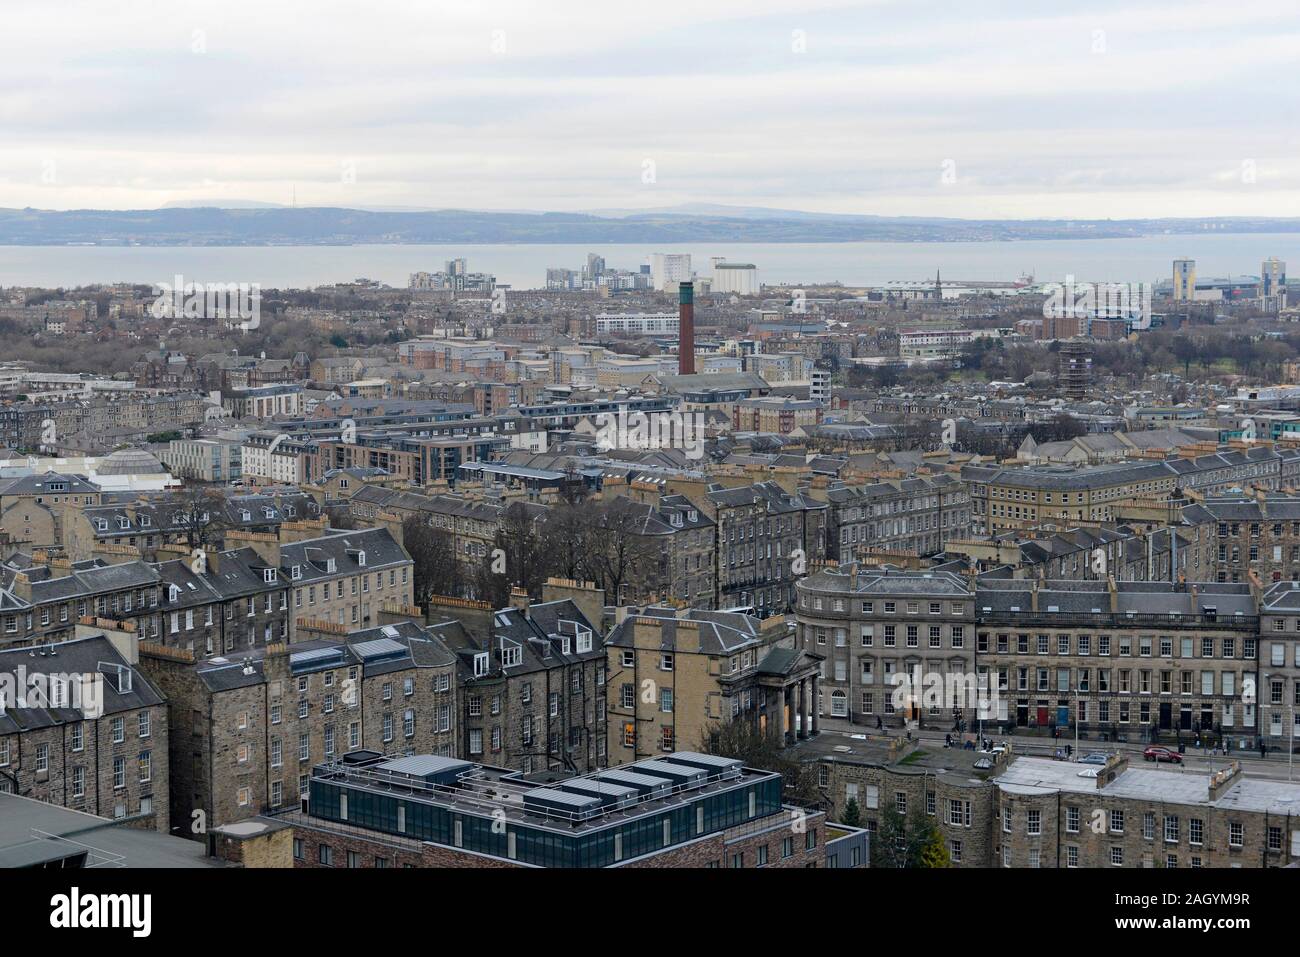 View from Calton Hill over Leith to the Firth of Forth on an overcast day in mid December. Edinburgh, Scotland, UK Stock Photo